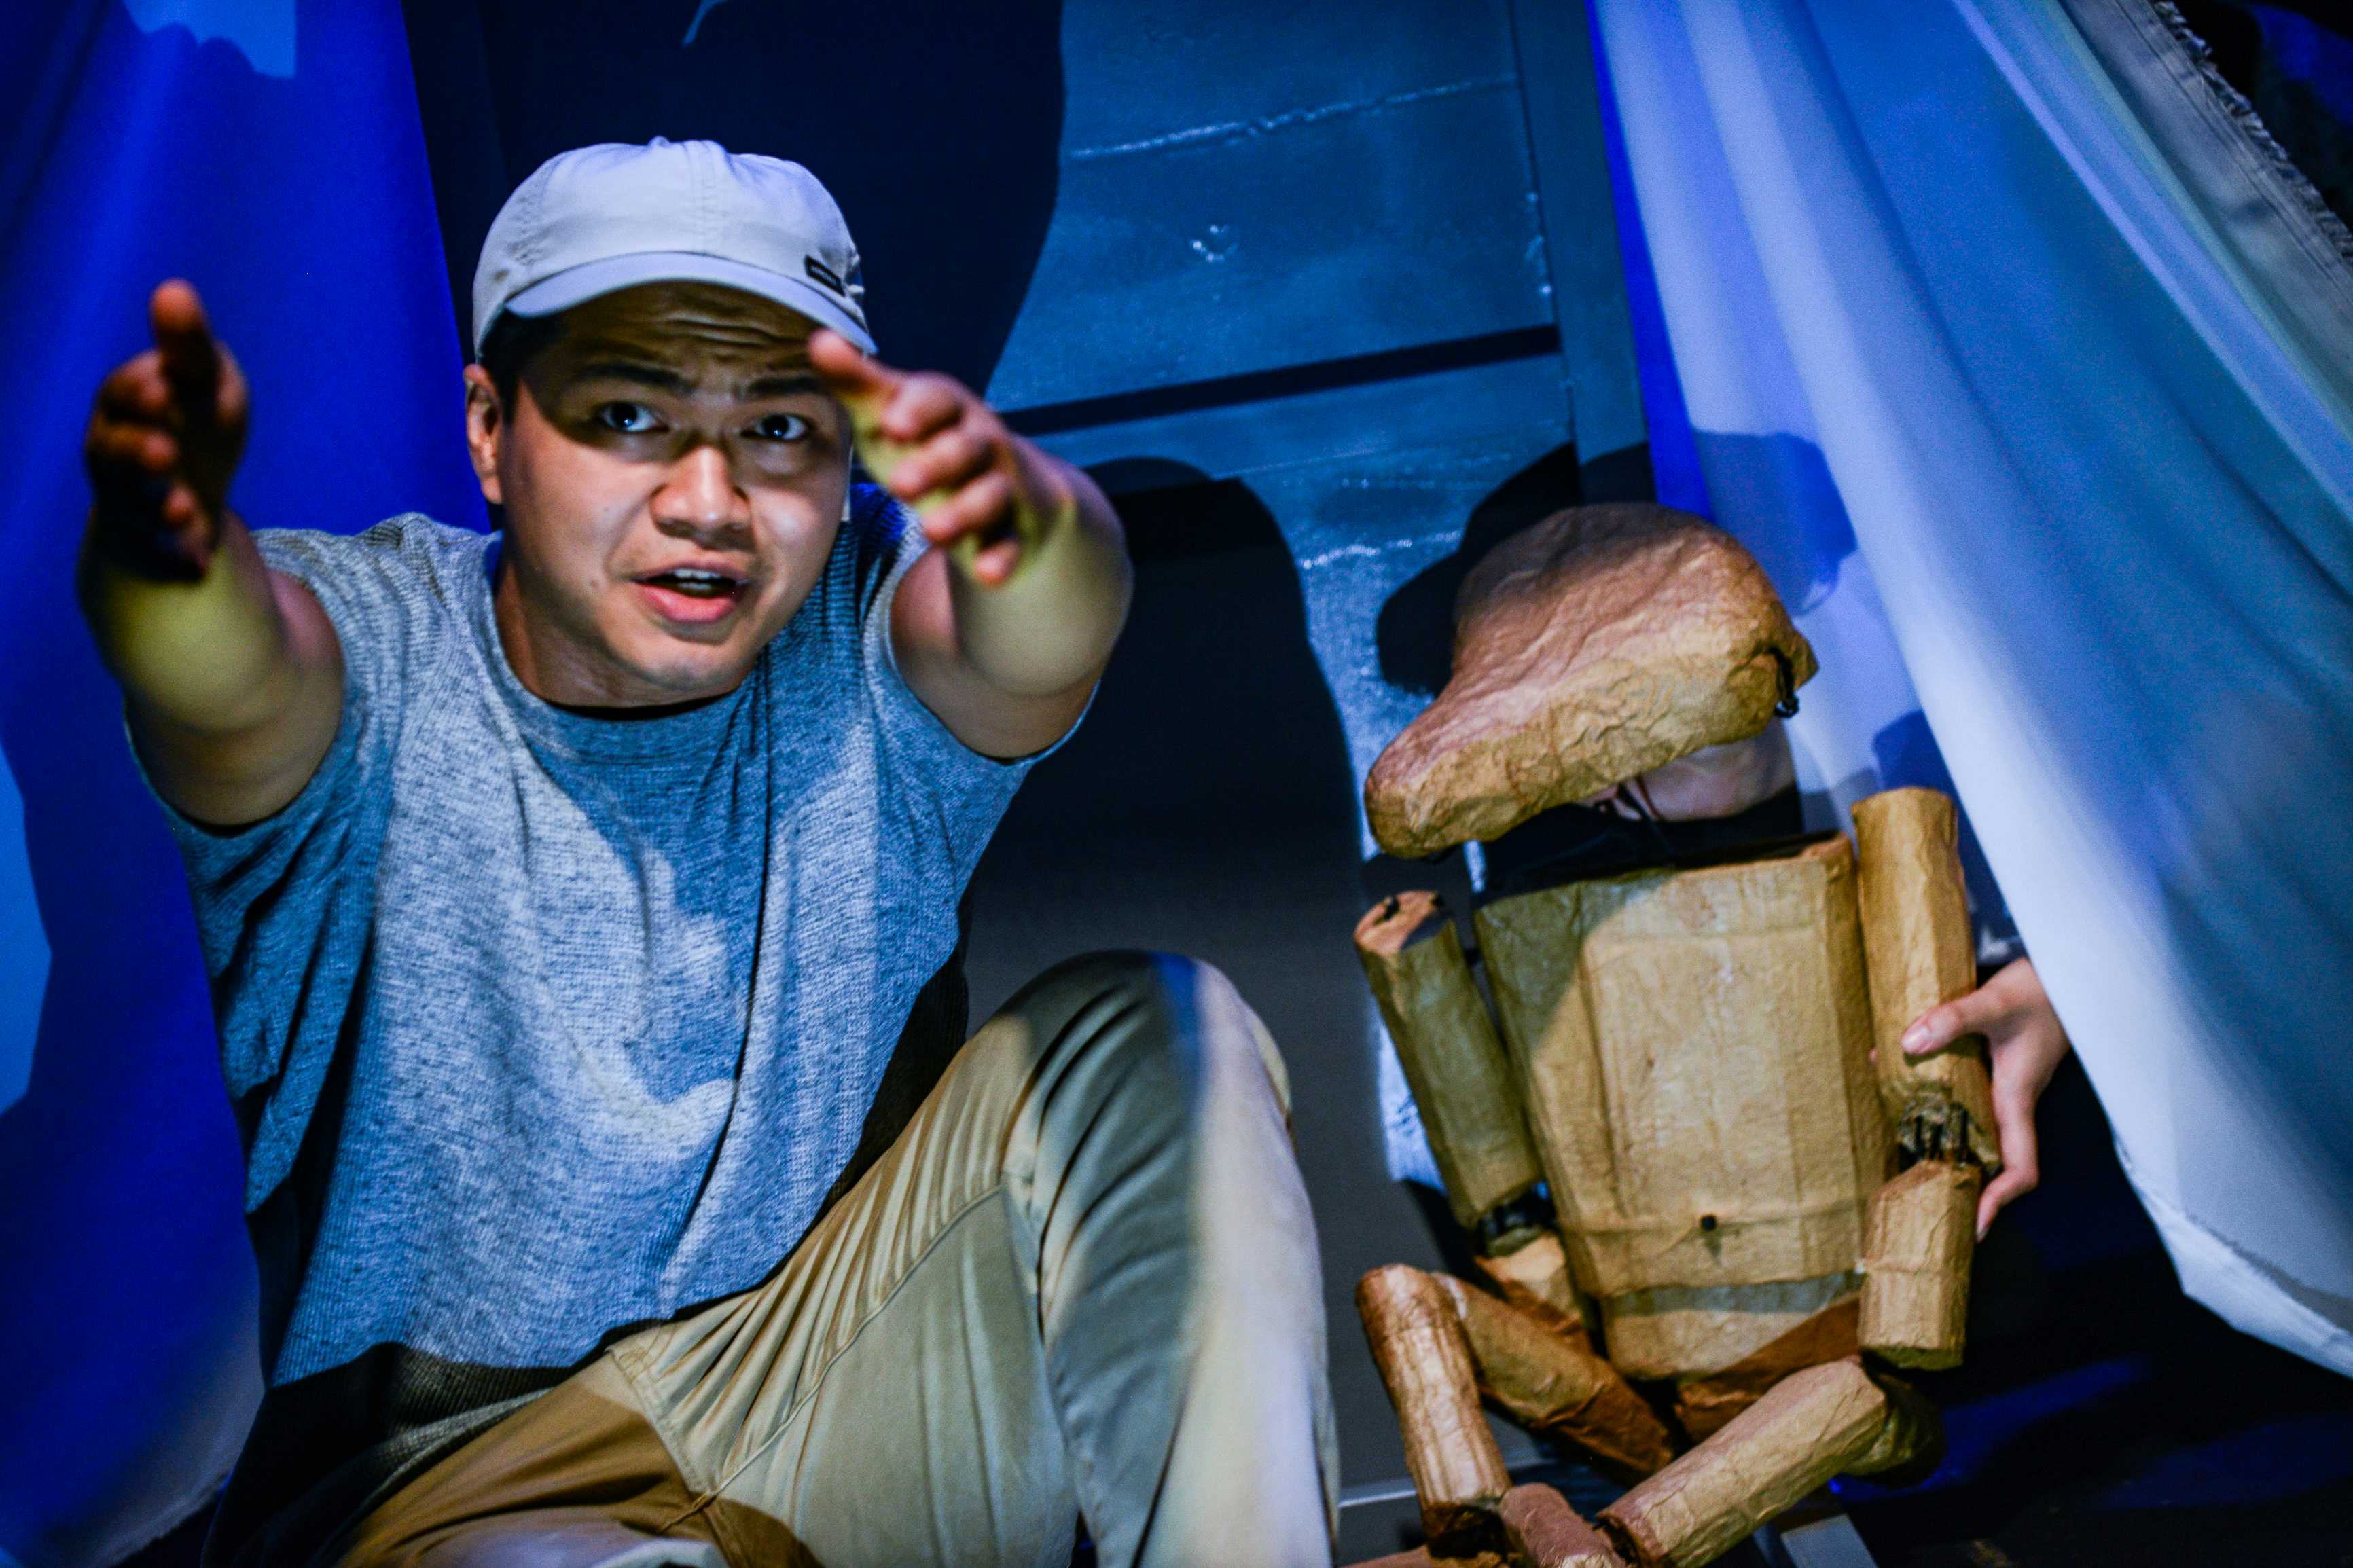 We would stay out all night across the whole Chinese border | Featuring: Basnet Tusar | Tagged as: Show, Testimony | Photo: Fung Wai Sun |  (Rooftop Productions • Hong Kong Theatre Company)  | Rooftop Productions • Hong Kong Theatre Company